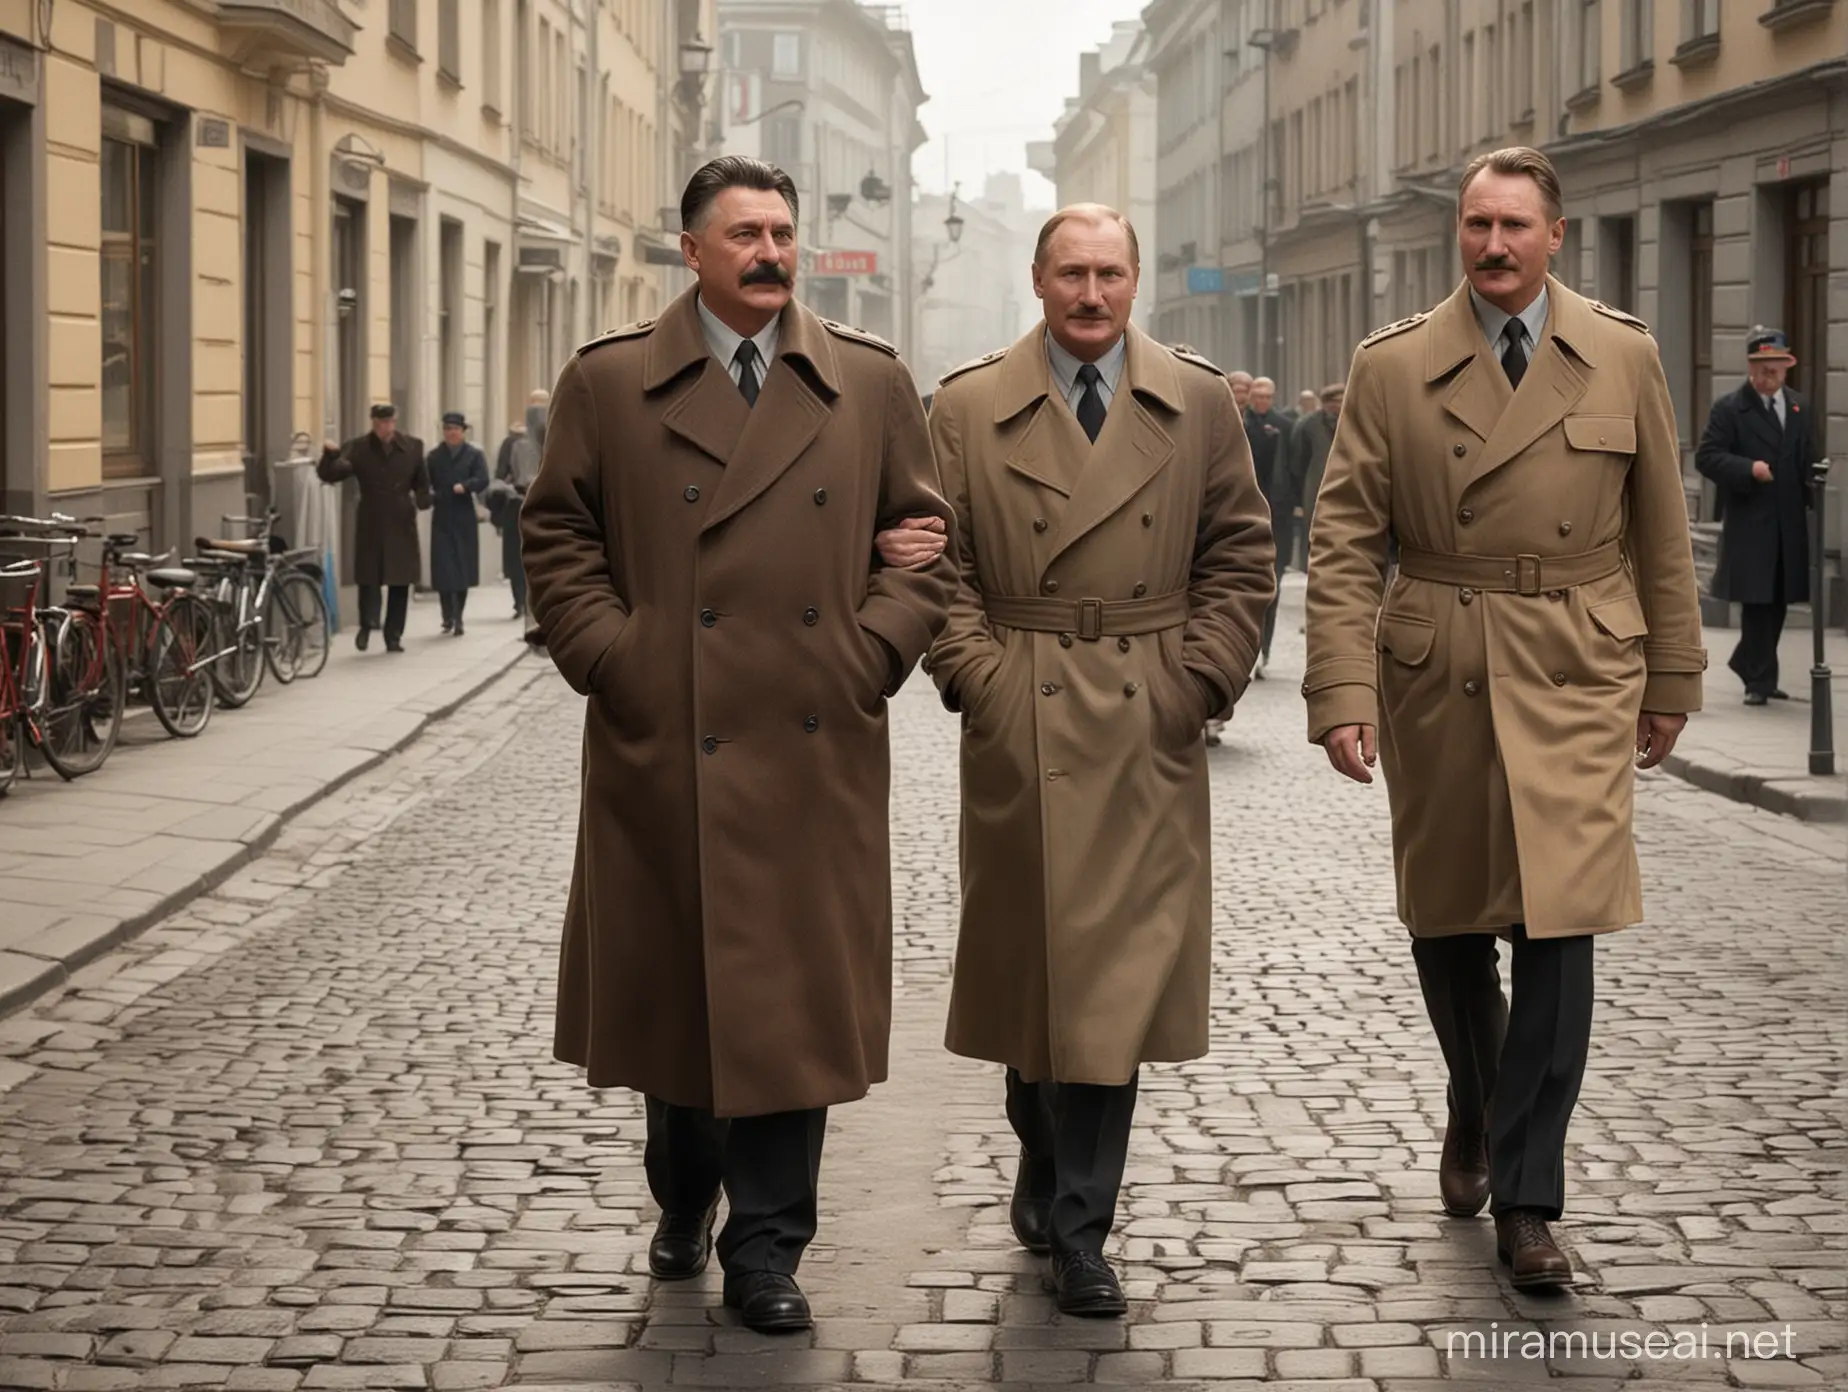 Josef Stalin leads two clearly shorter men on the streets of Helsinki: Adolf Hitler and Vladimir Putin. The weather is sunny and Josef Stalin is delighted. Authentic looking spotlight.